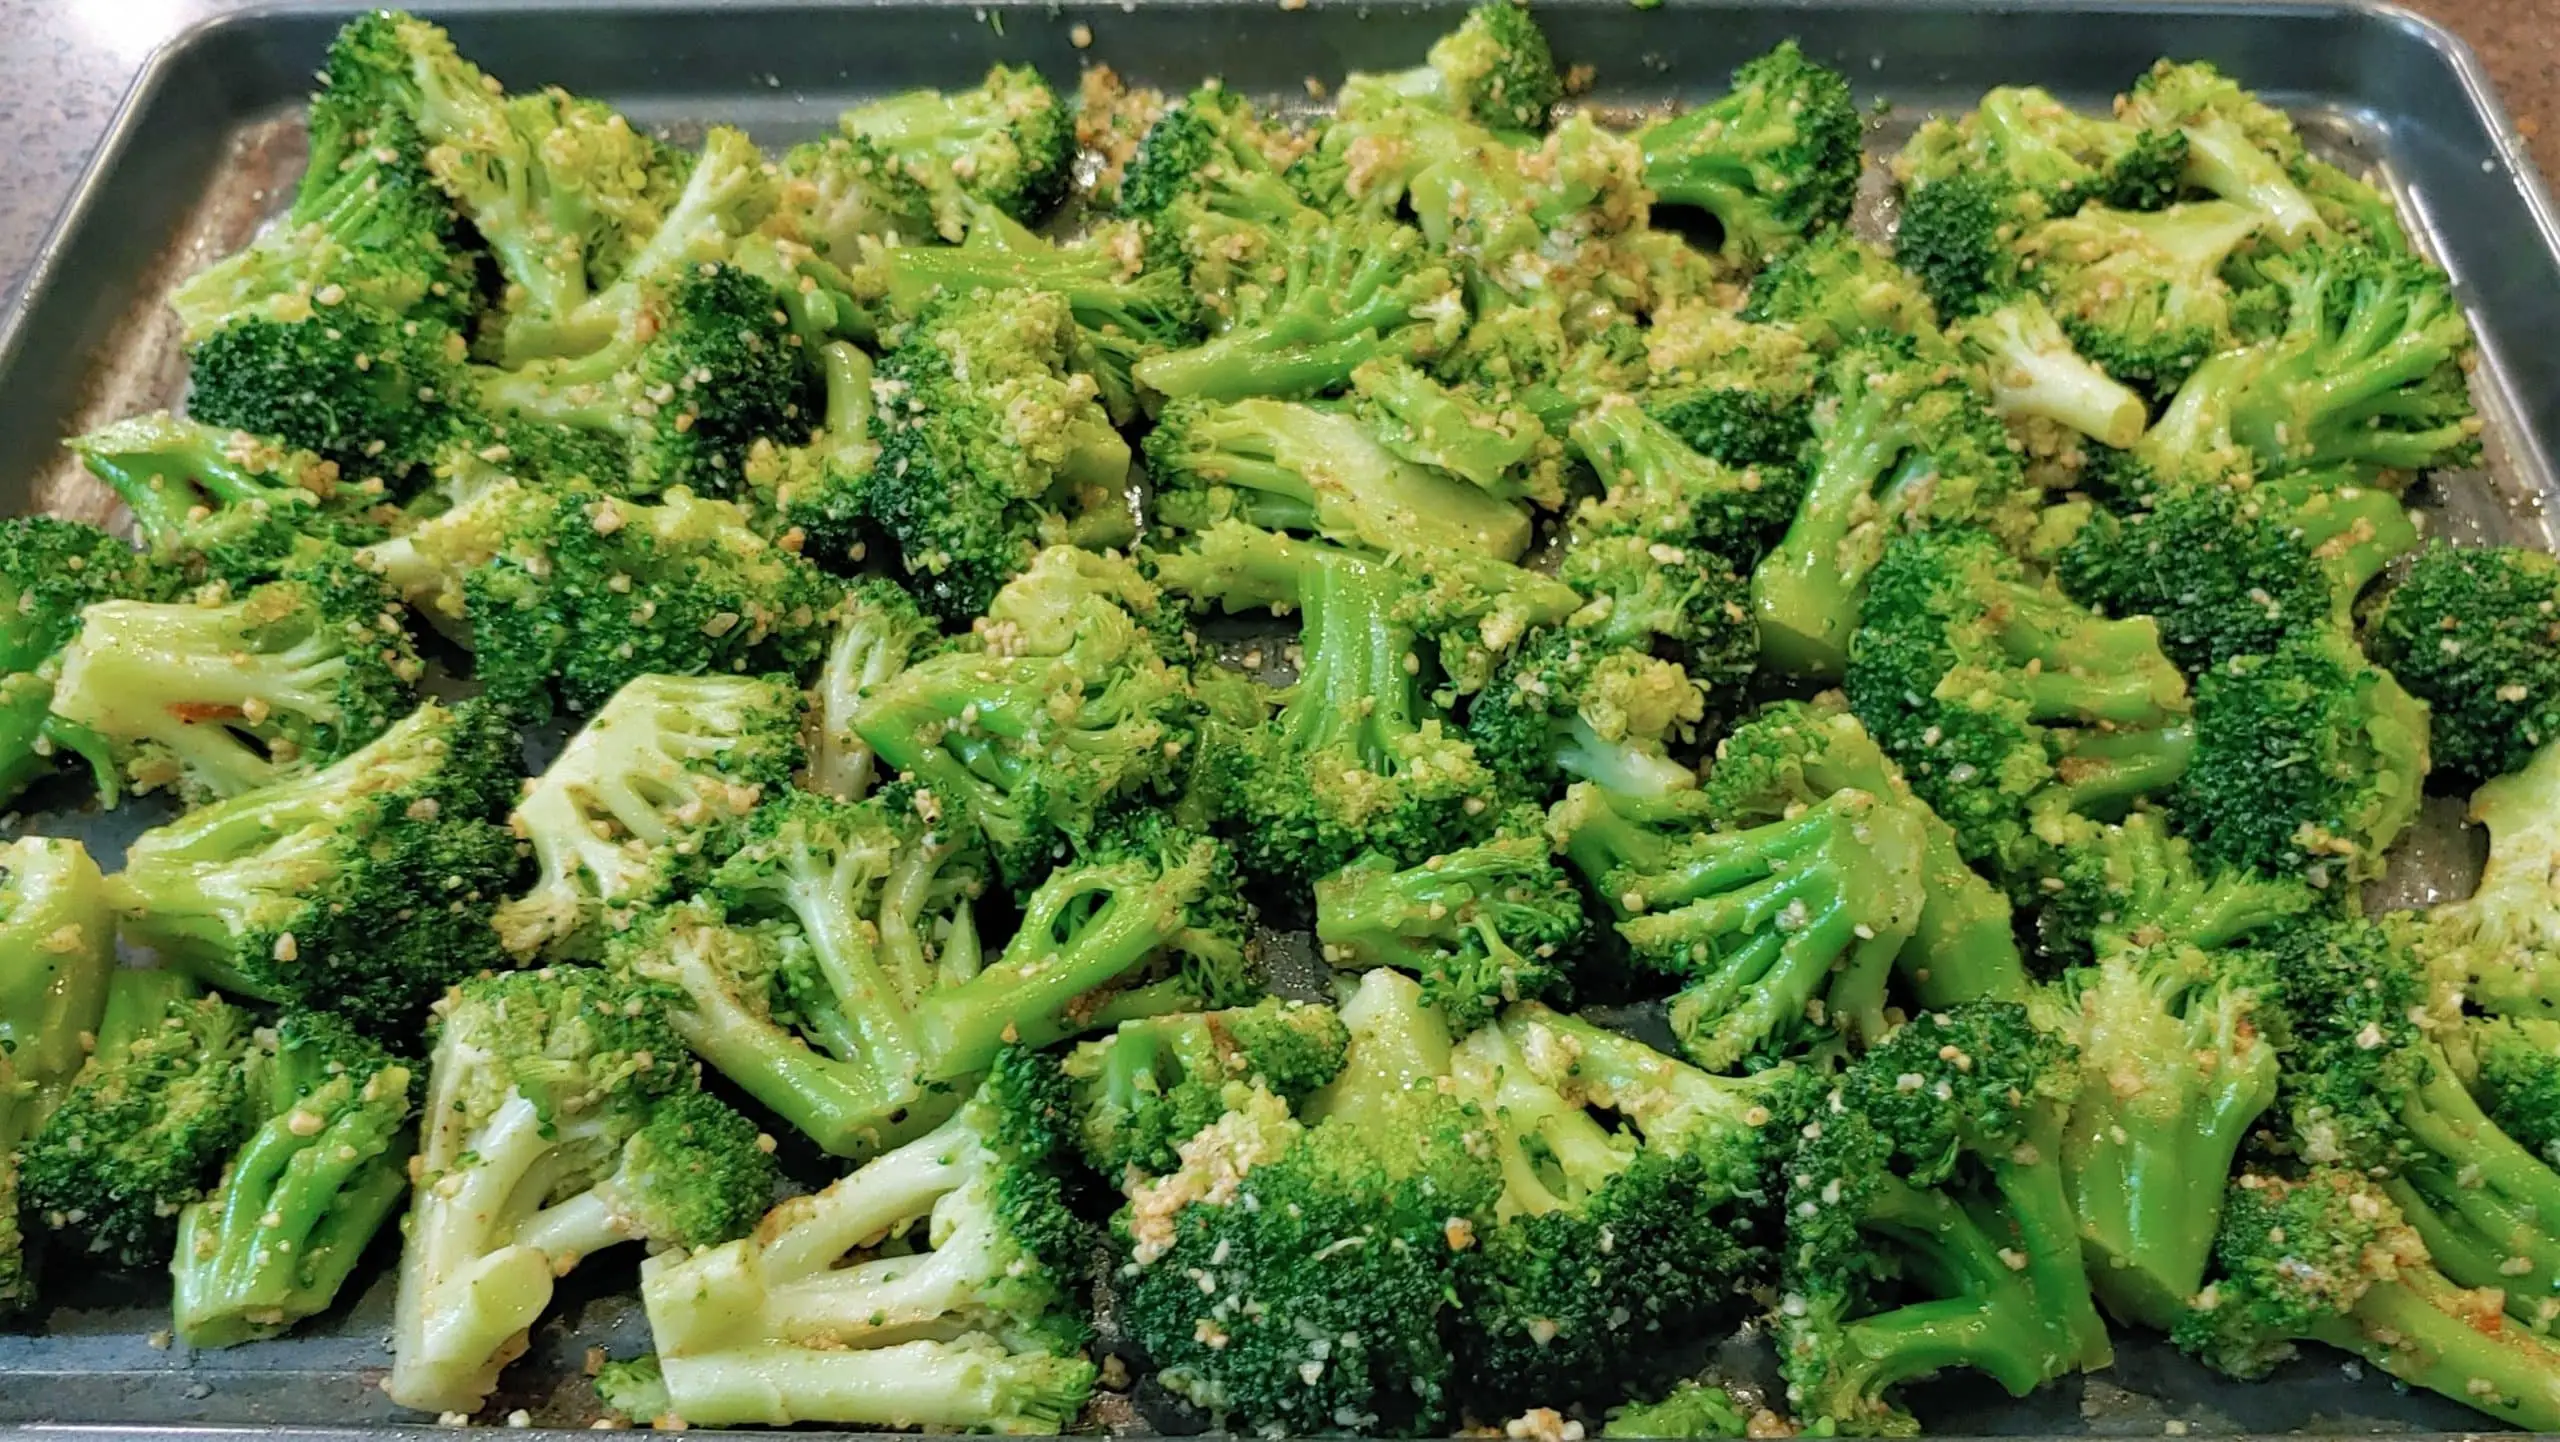 Roasted broccoli vegetable - Dining in with Danielle